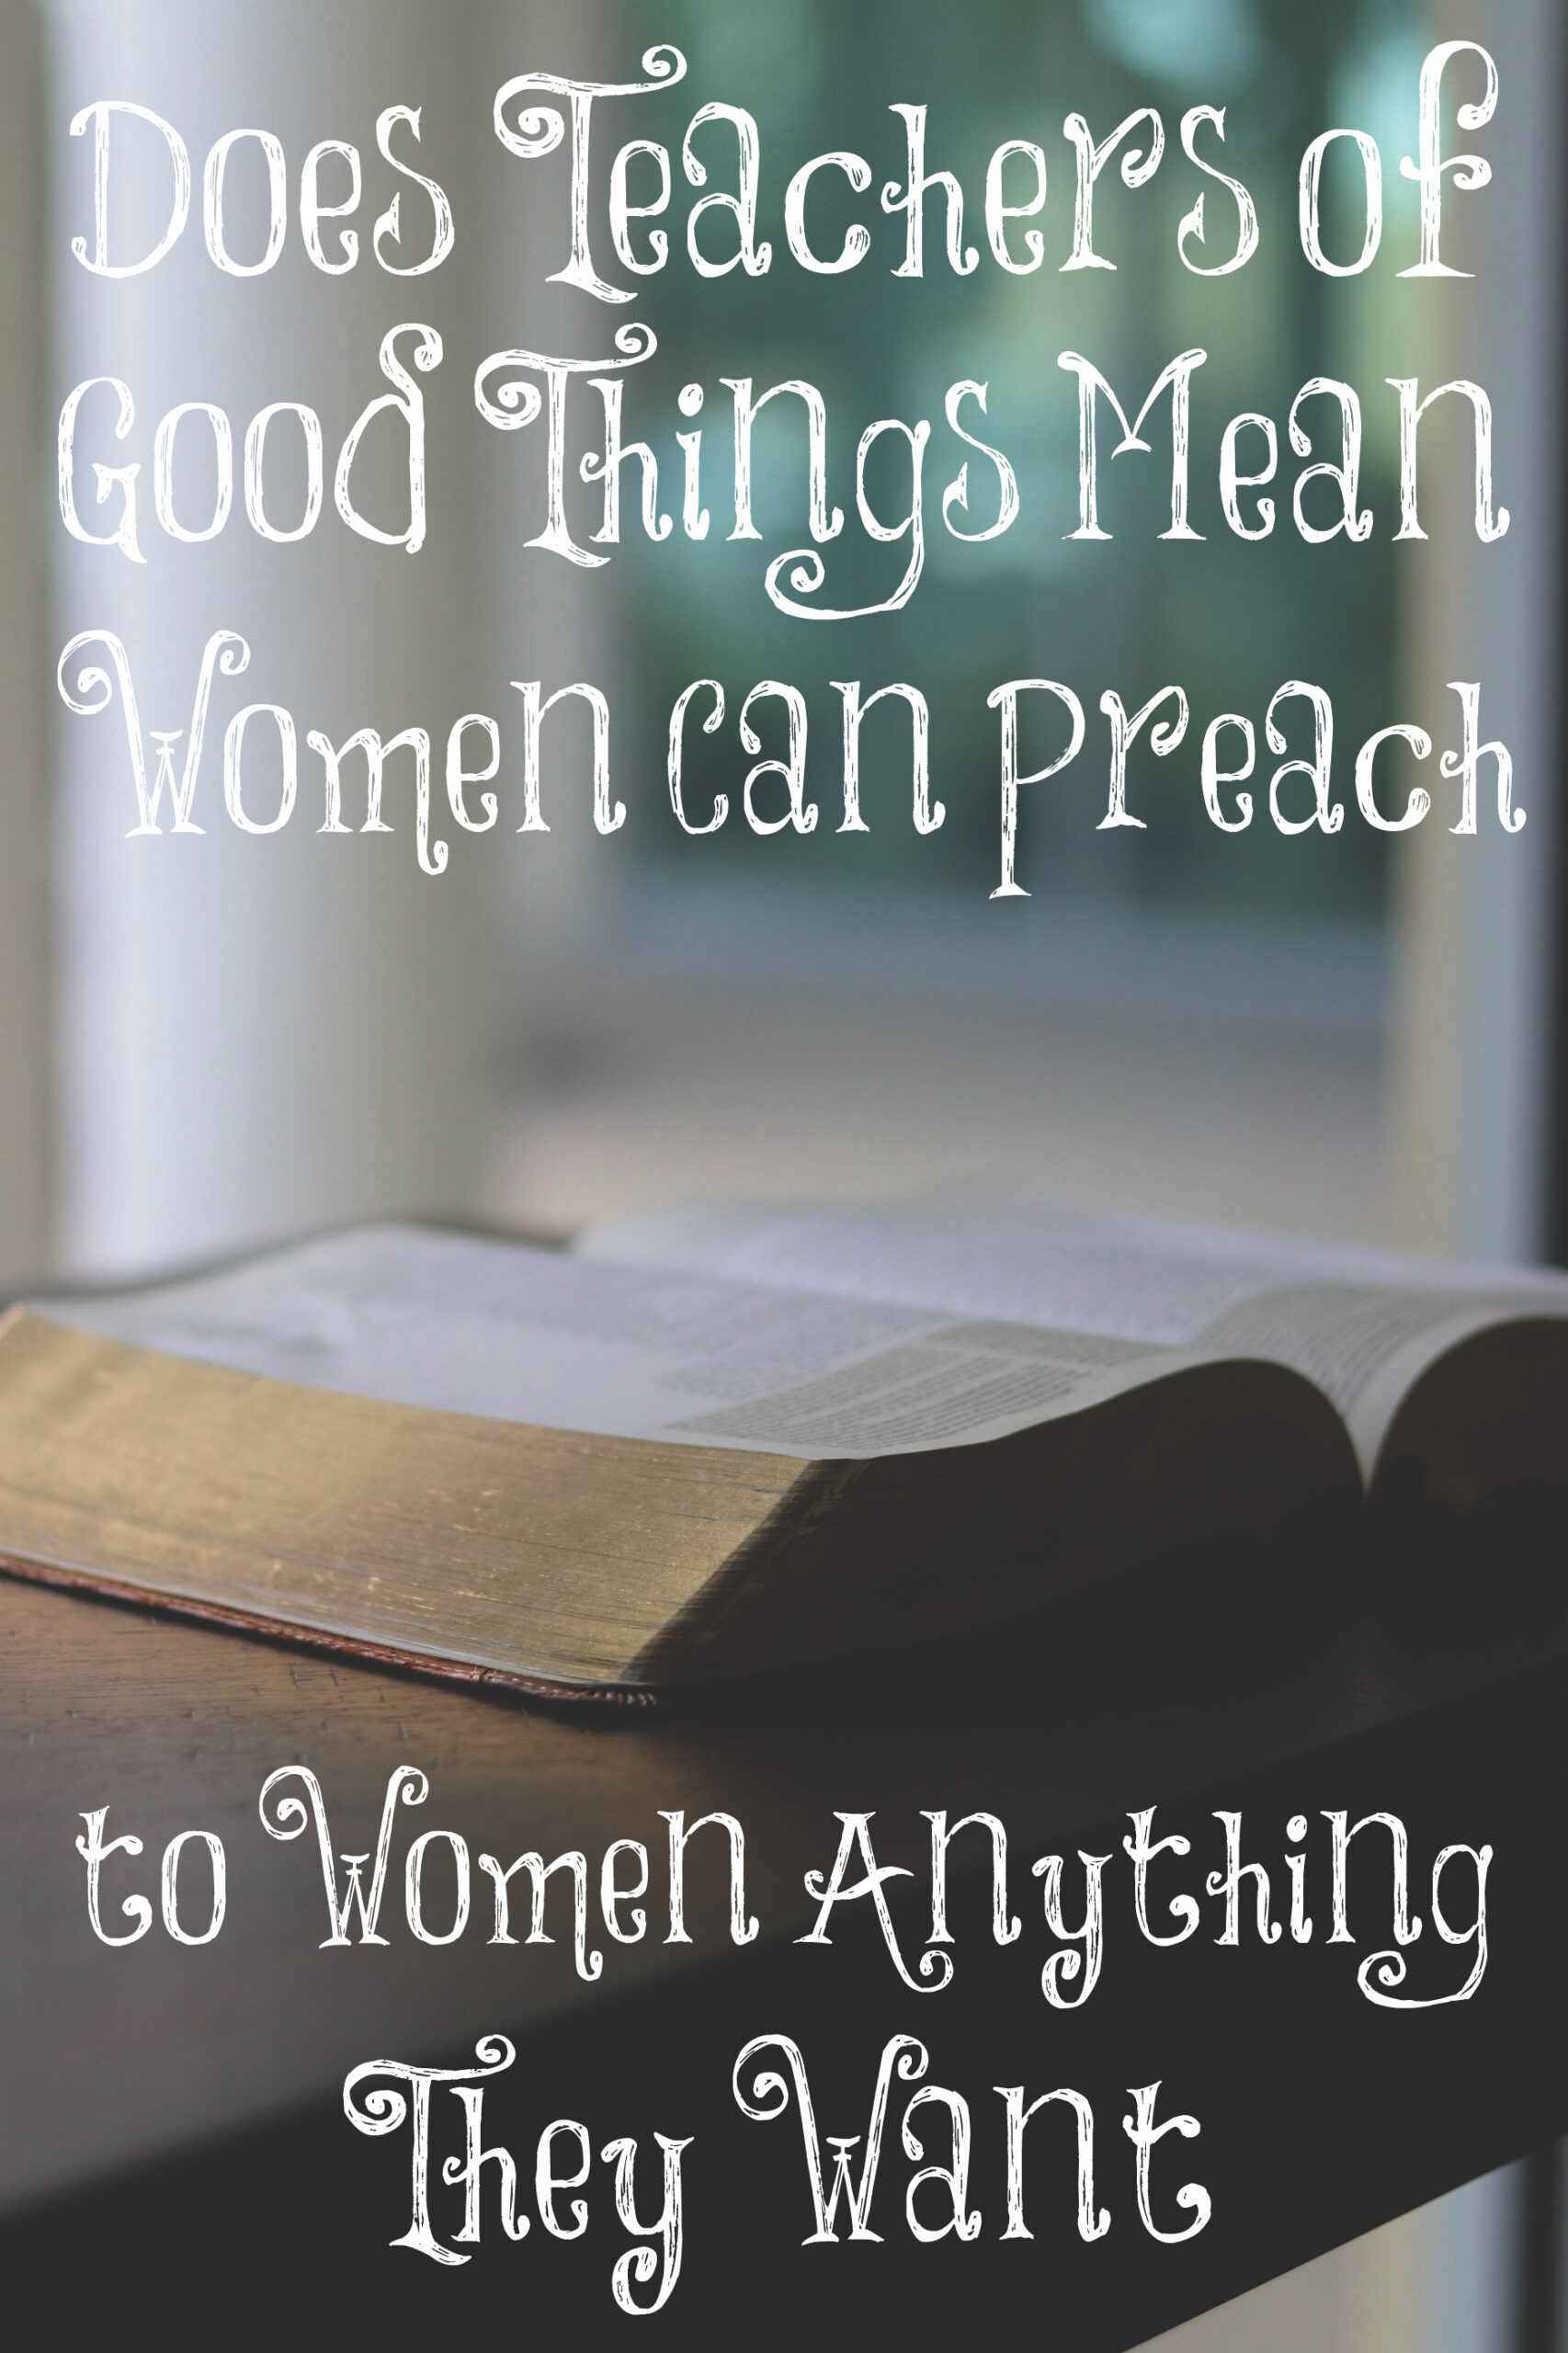 does-teachers-of-good-things-mean-women-can-preach-to-women-anything-they-want-the